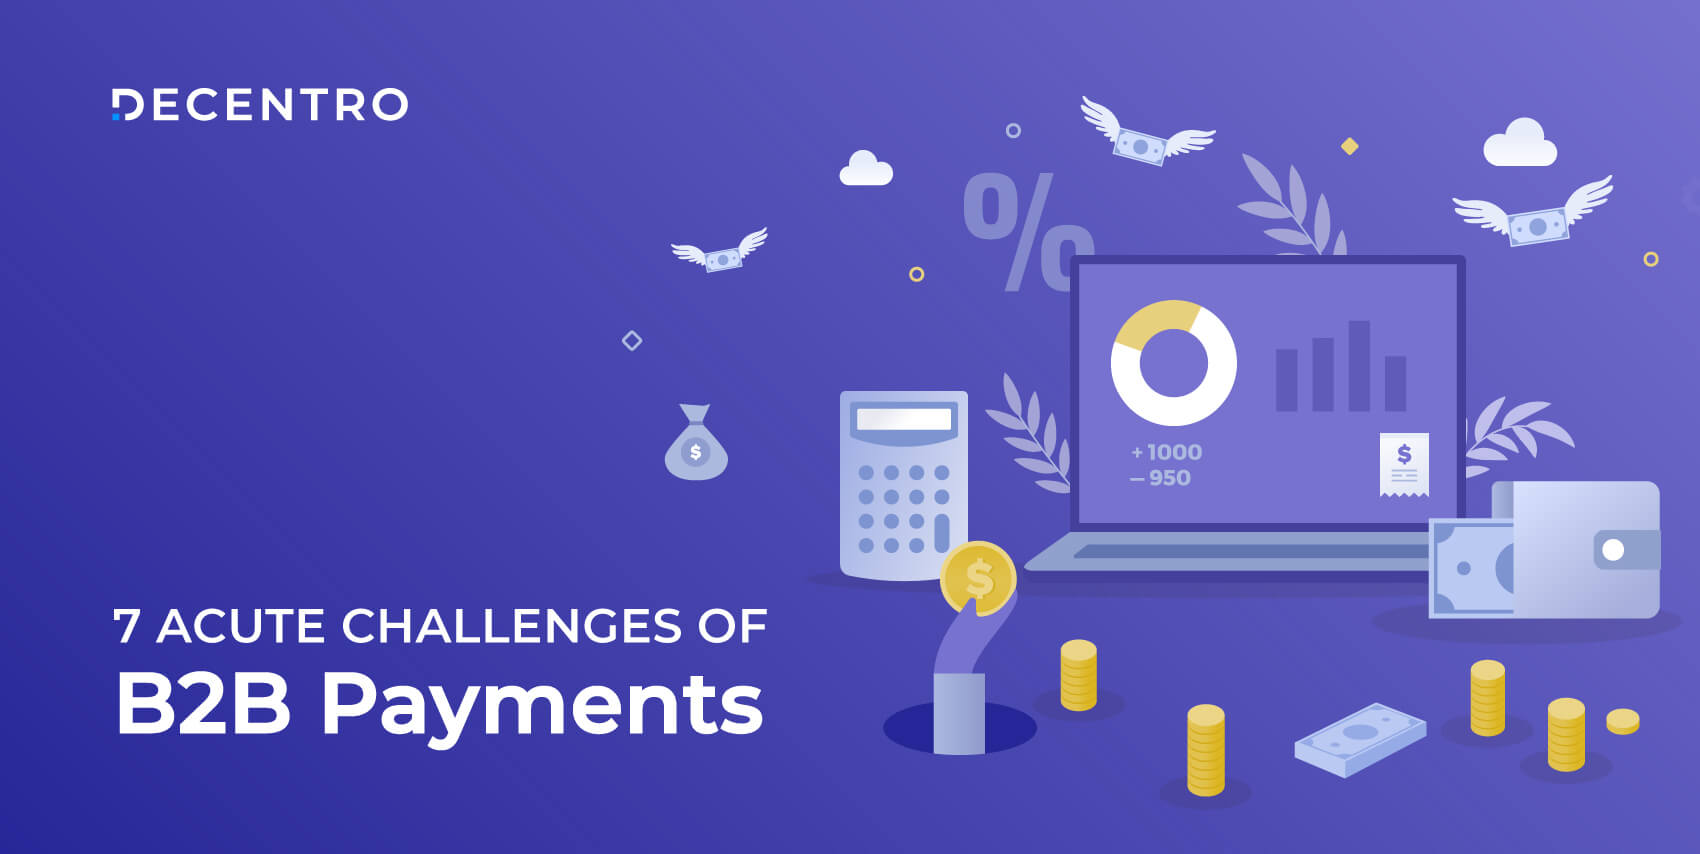 Identify & Overcome These 7 Acute Challenges of B2B Payments.